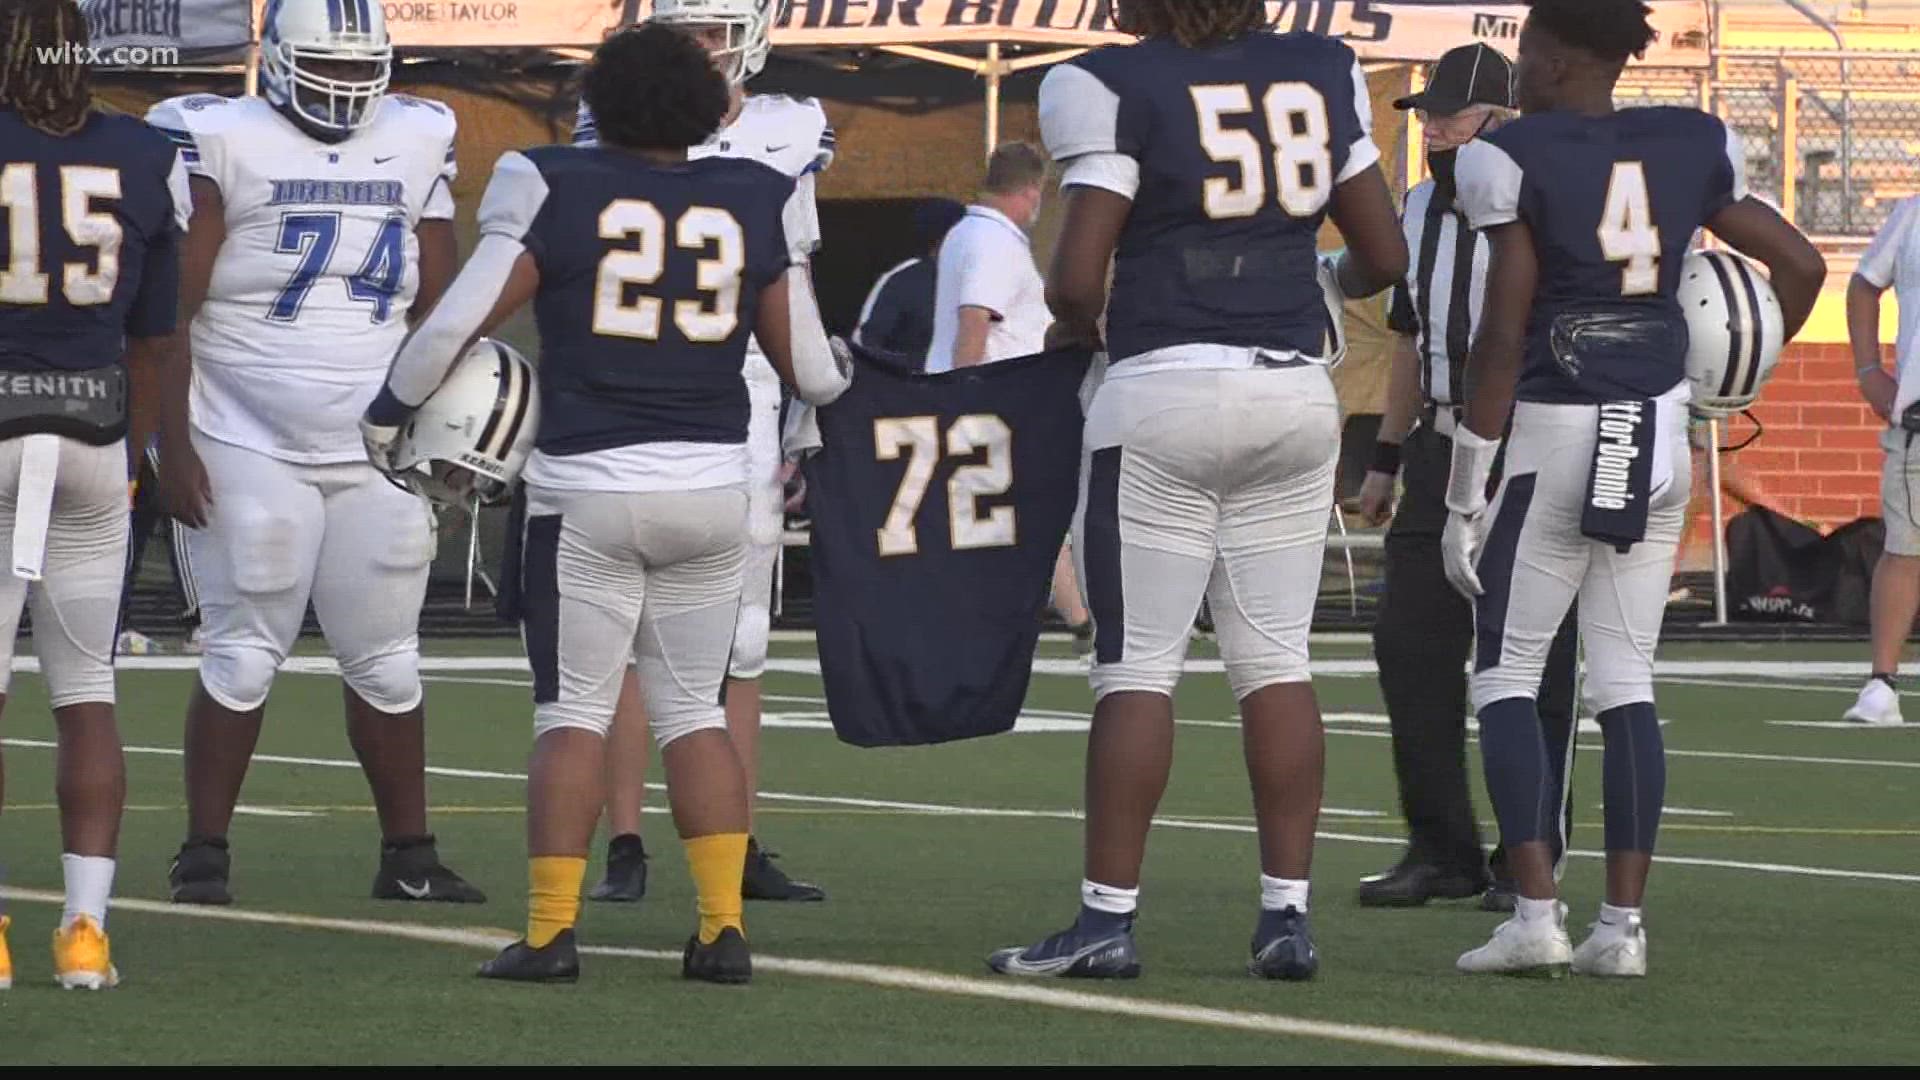 An emotional tribute was held at Keenan High School Friday night in honor of beloved student-athlete Donadrian Robinson.